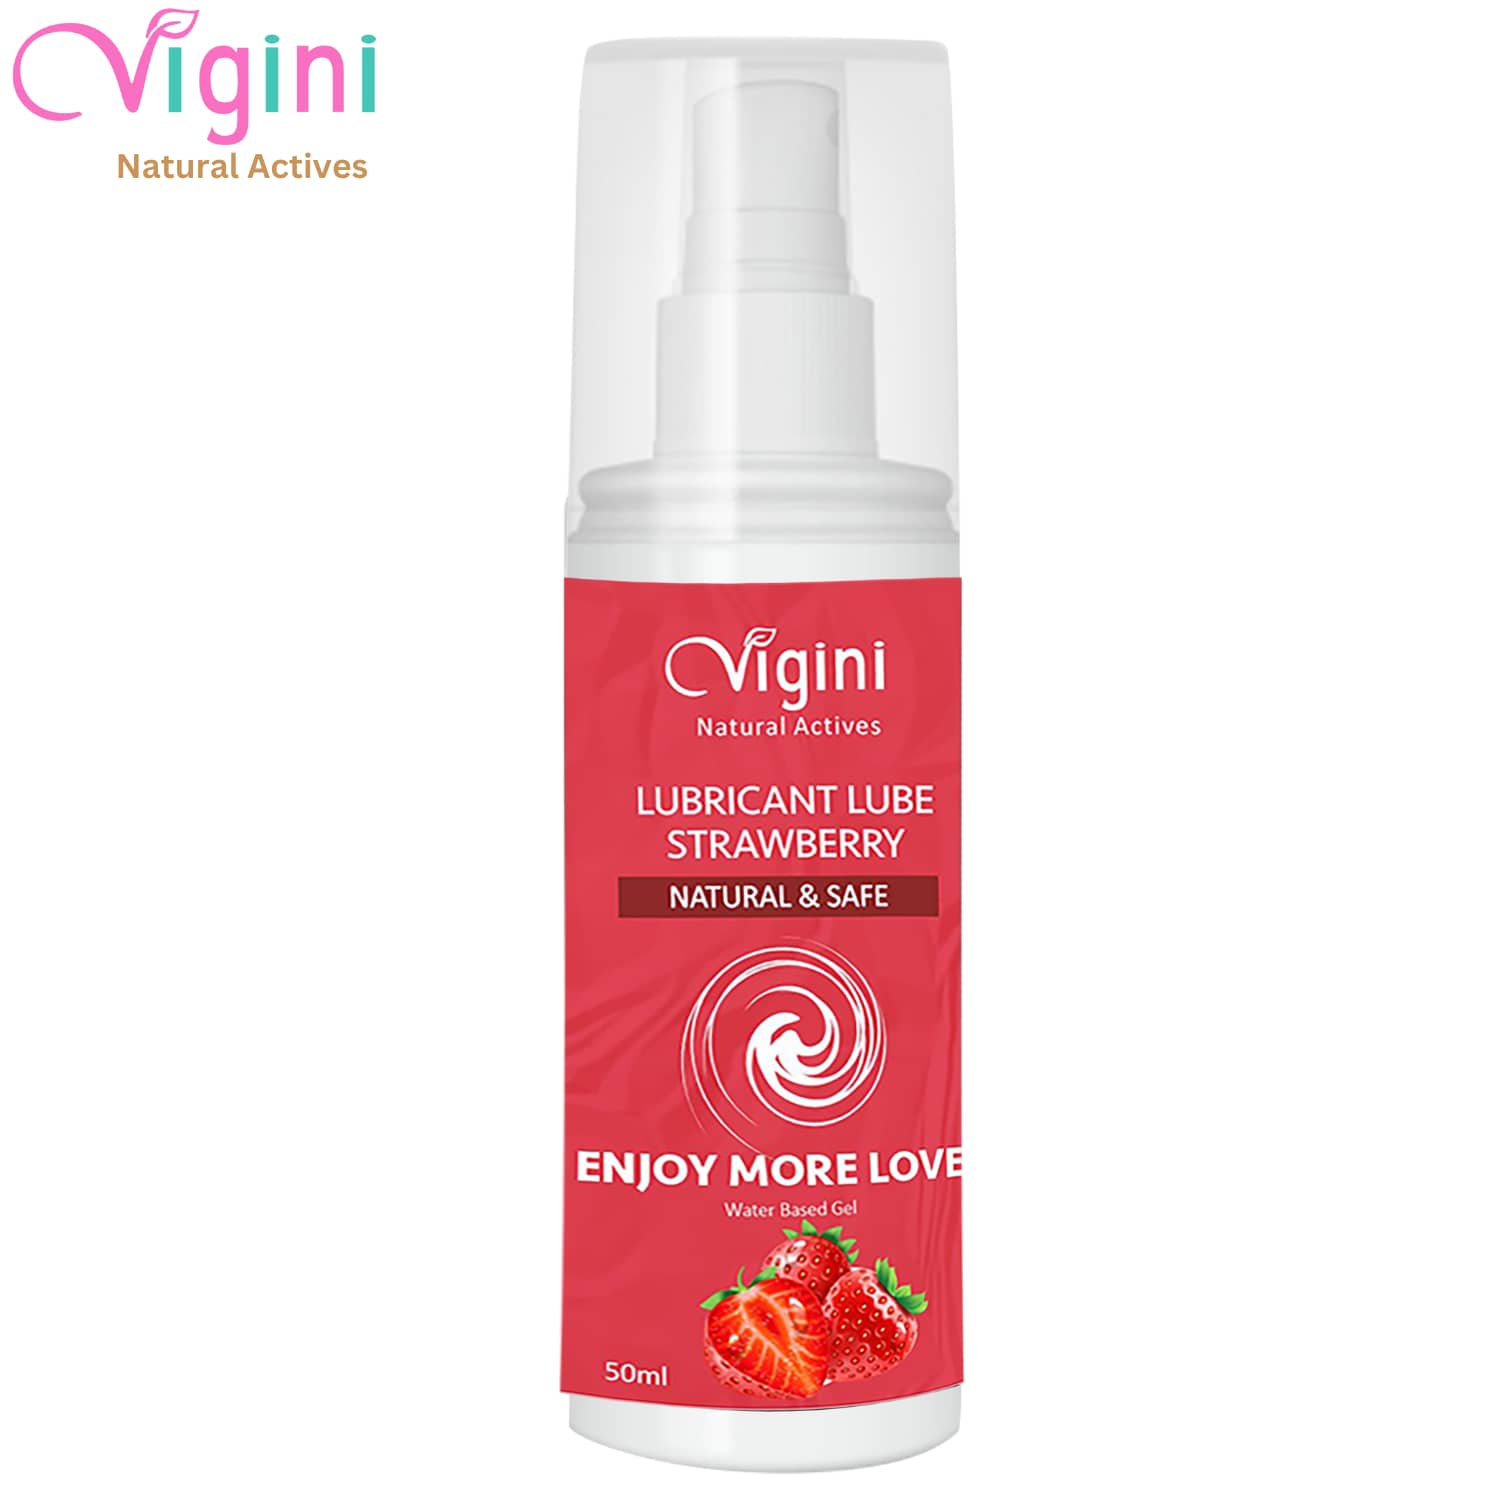 Vigini Intimate Strawberry Lubricant Personal Lube Water Based Gel for Long Lasting Sex Non-Sticky-50ml